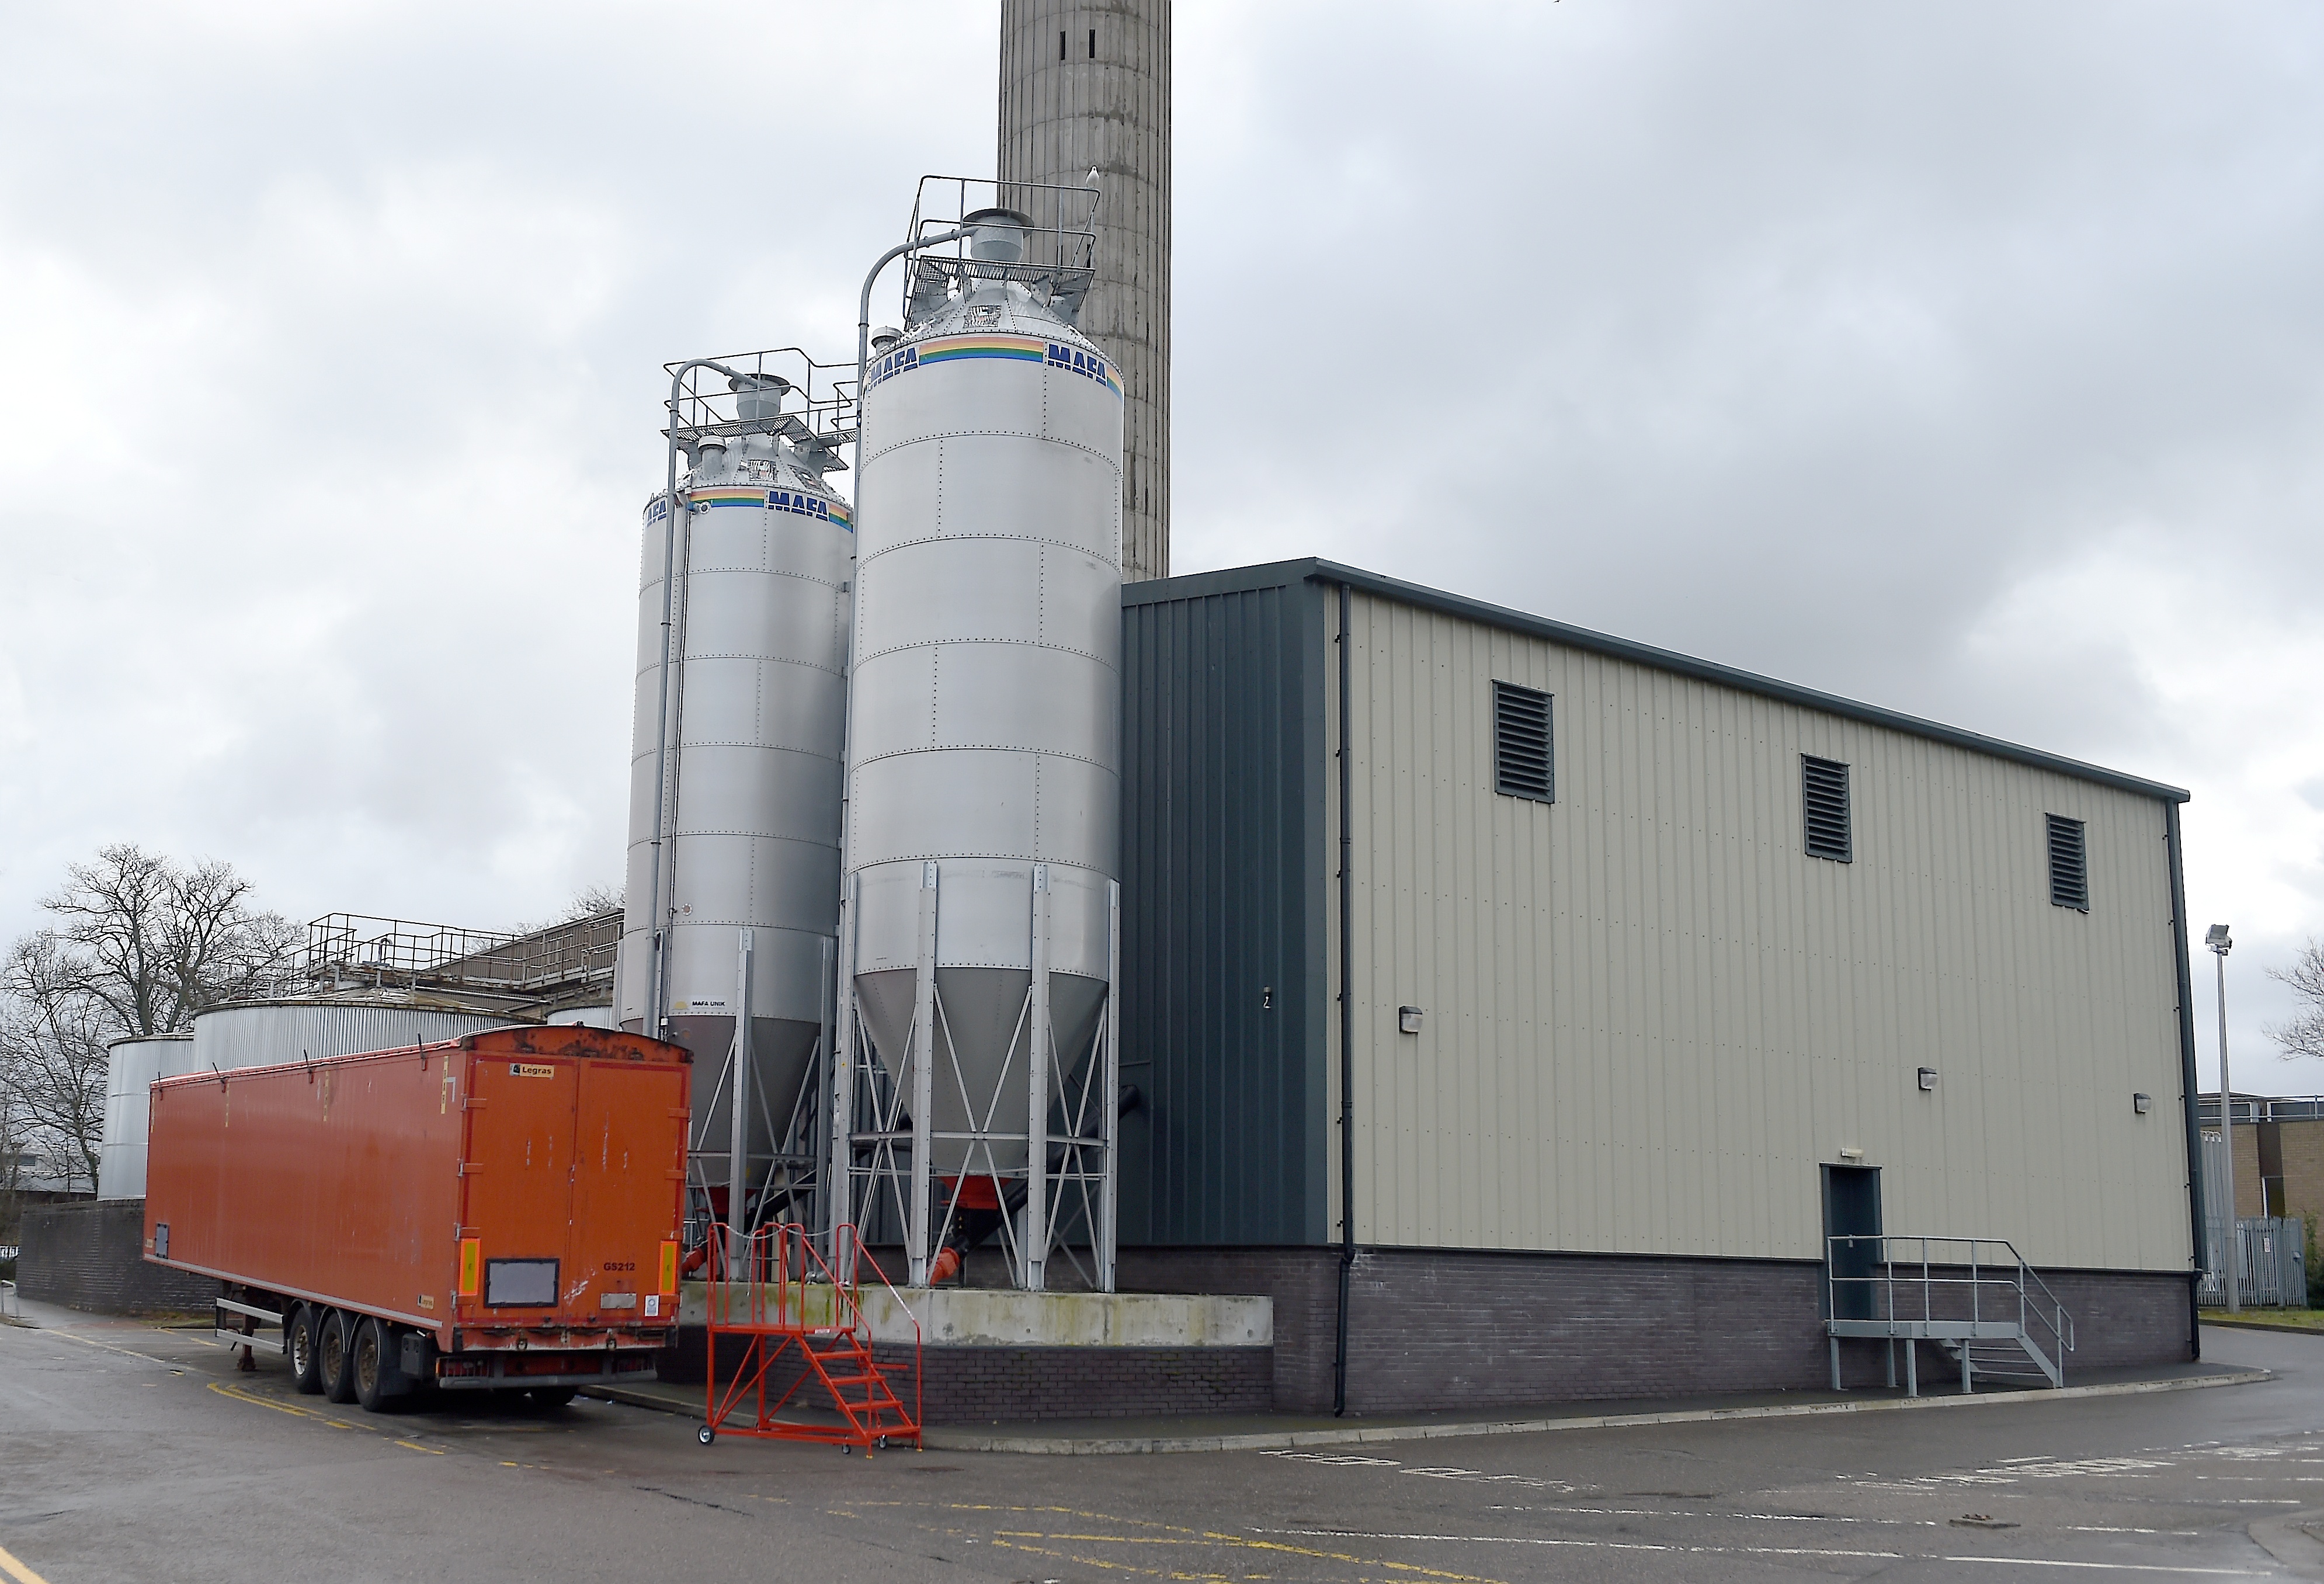 The biomass power plant at Raigmore Hospital, Inverness which is still not back in operation following an explosion in March 2015.